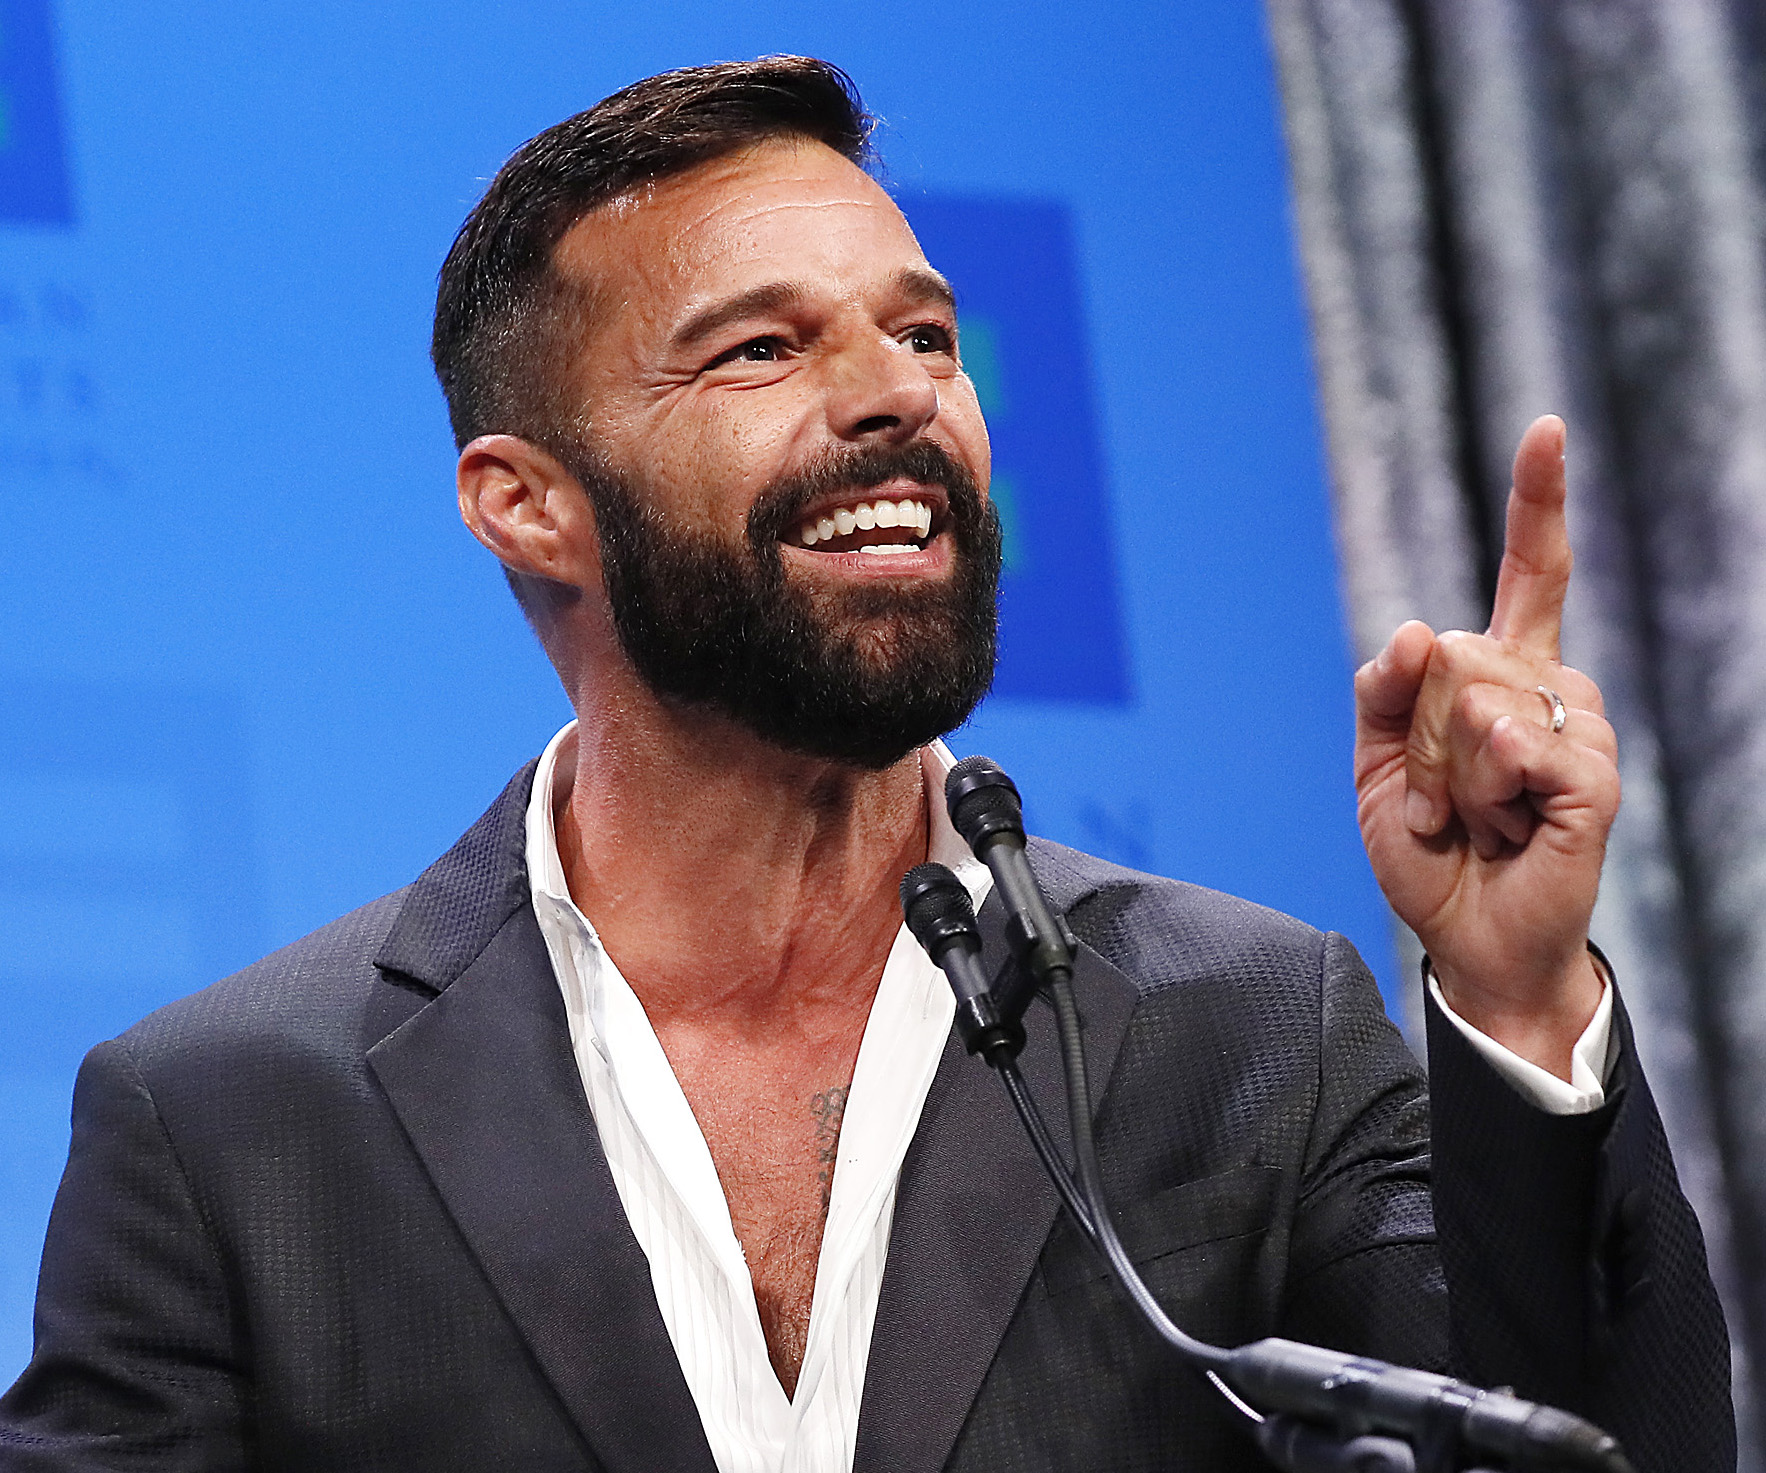 Ricky Martin announces he is expecting a fourth child with husband Jwan Yosef